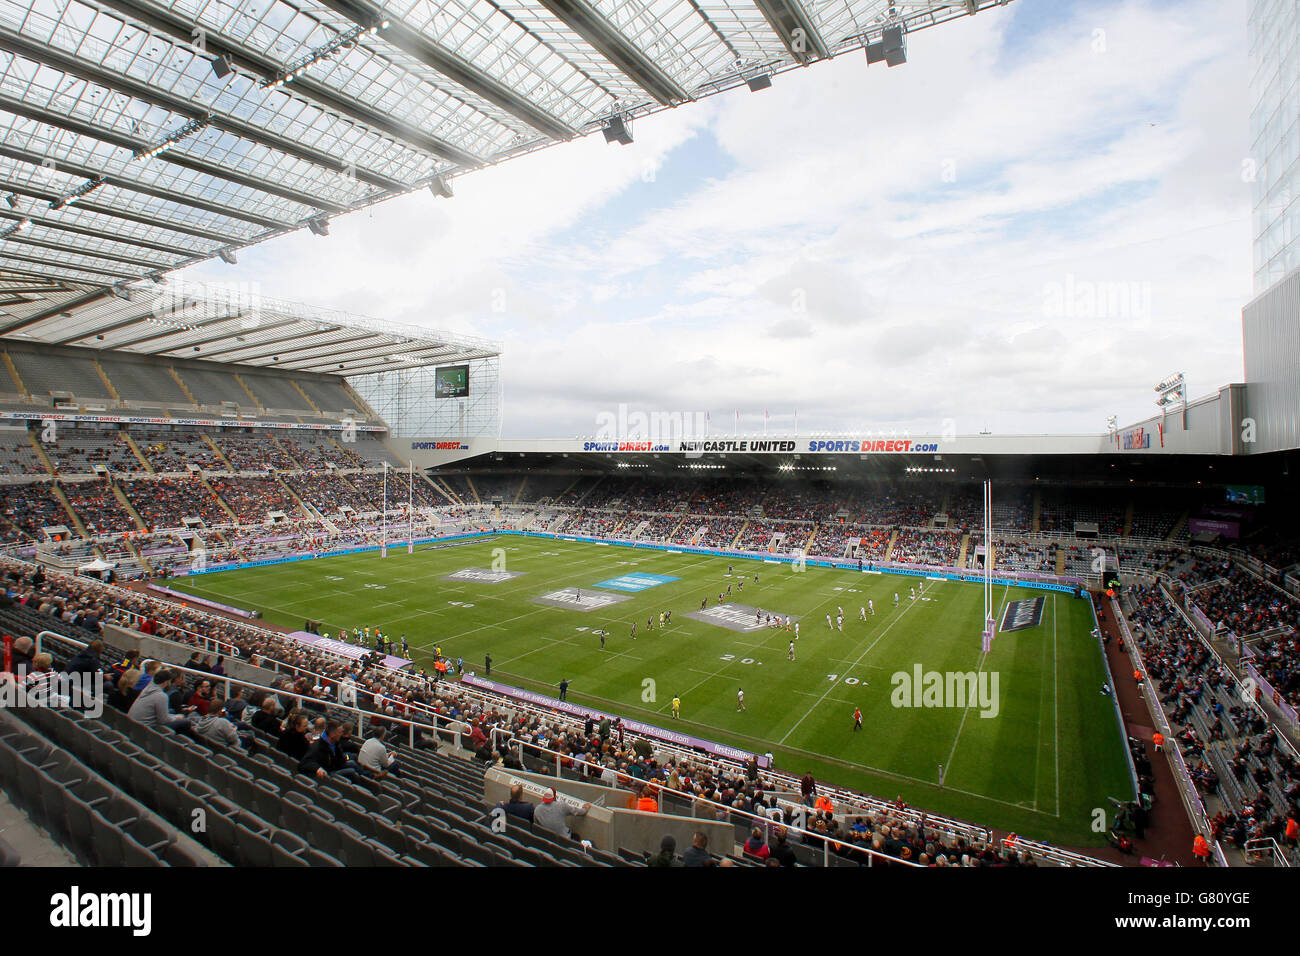 Rugby League - Magic Weekend - Catalans Dragons v Huddersfield Giants - St James' Park. St. James' Park during the Magic Weekend. Stock Photo